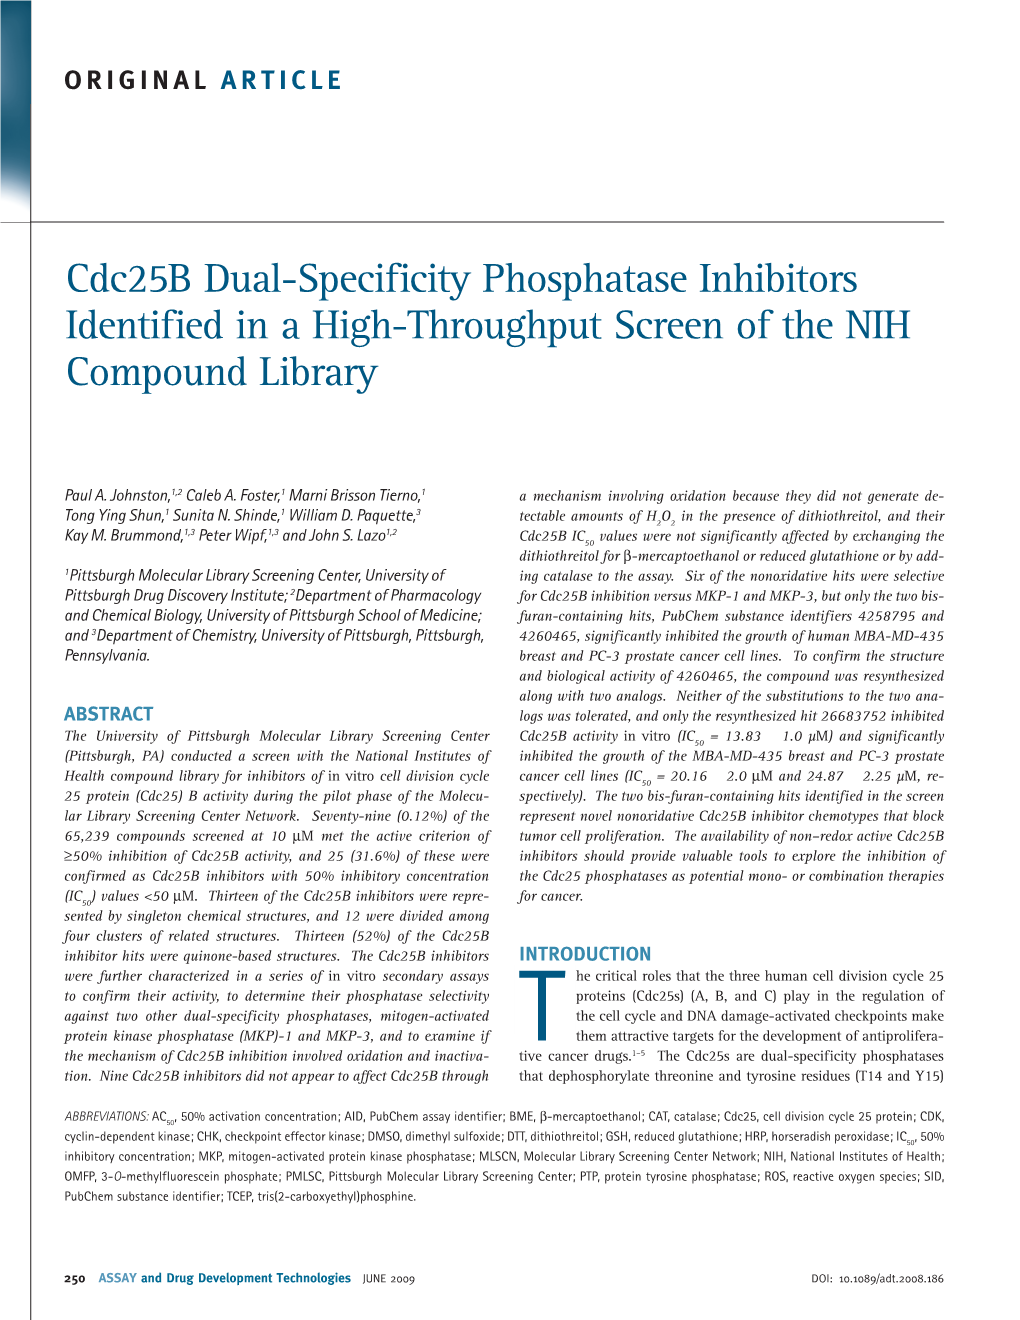 Cdc25b Dual-Specificity Phosphatase Inhibitors Identified in a High-Throughput Screen of the NIH Compound Library